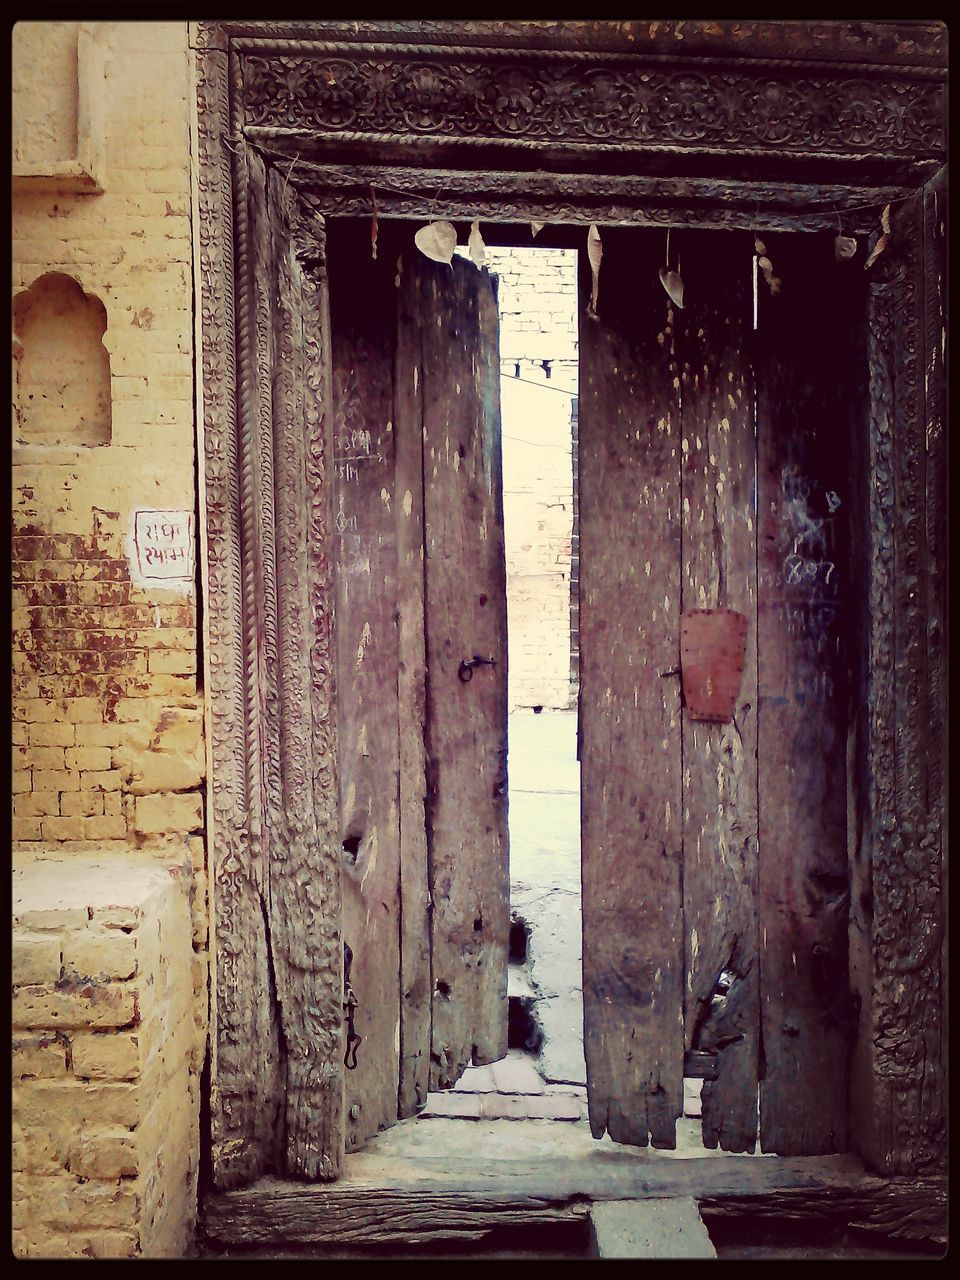 architecture, built structure, door, old, building exterior, weathered, closed, entrance, house, doorway, abandoned, damaged, deterioration, wood - material, run-down, history, obsolete, wall - building feature, window, day